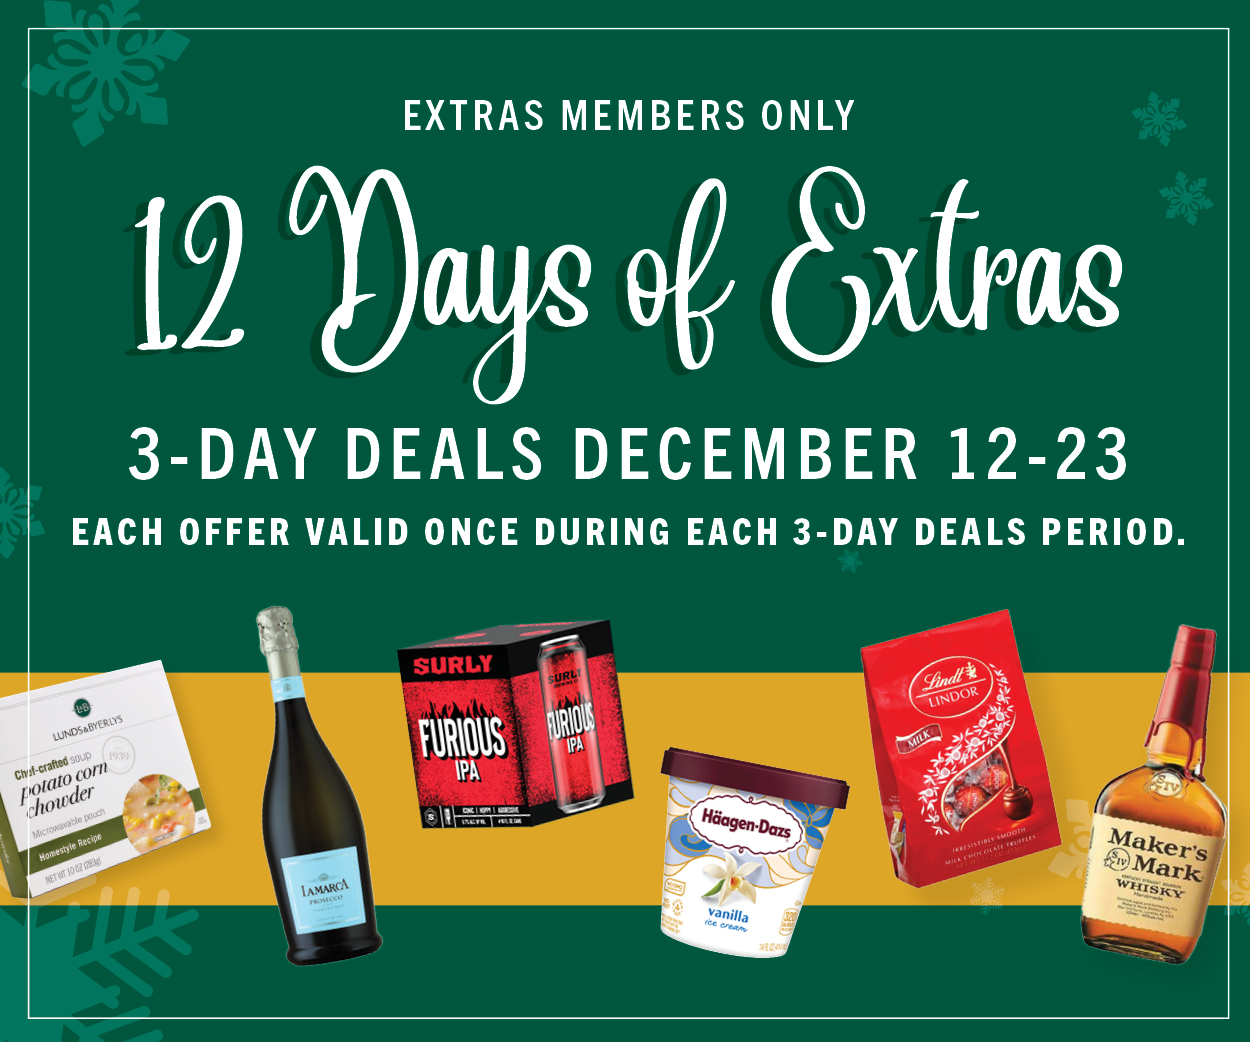 EACH OFFER VALID ONCE DURING EACH 3-DAY DEALS PERIOD.